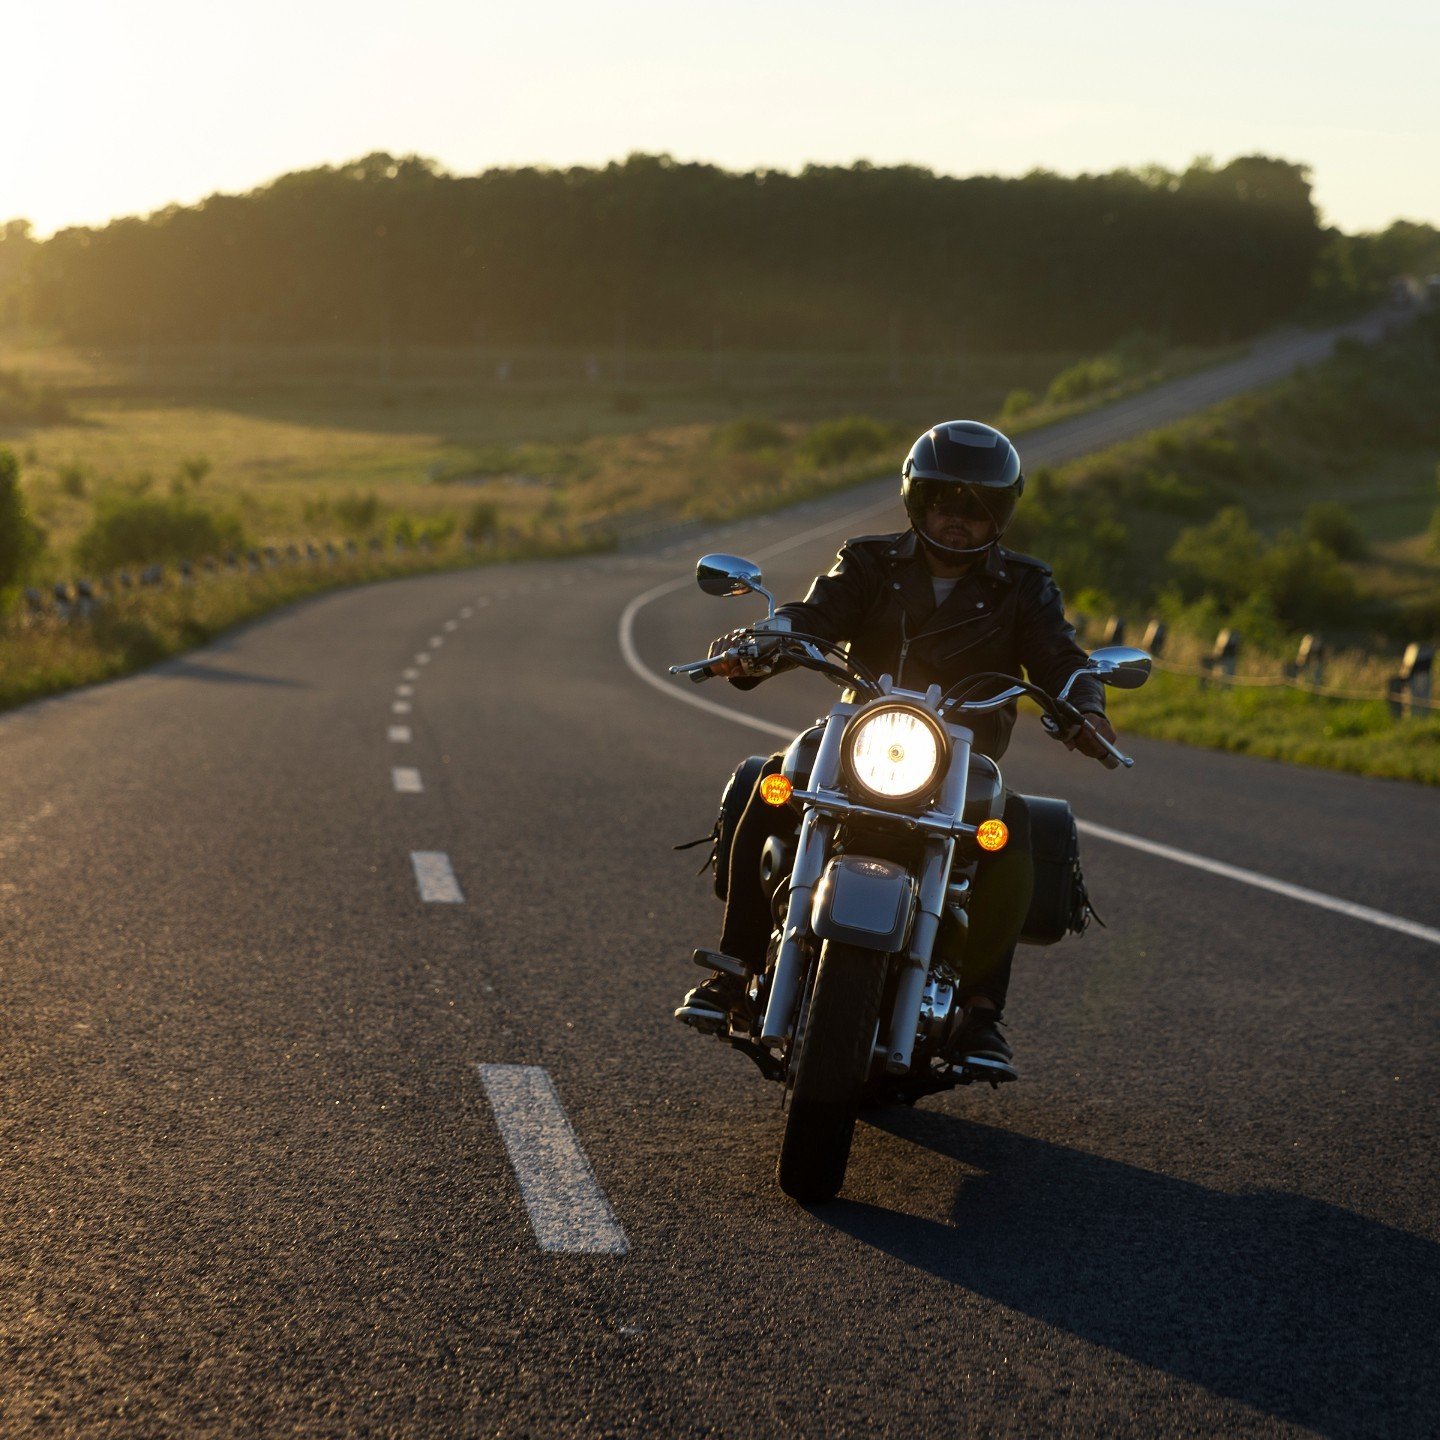 🏍️ As we enter the peak motorcycle riding season, it's important to prioritize safety. 🏍️

May is Motorcycle Safety Awareness Month and we want to call attention to how smart, attentive driving and riding behaviors can help save lives.

Now, more t